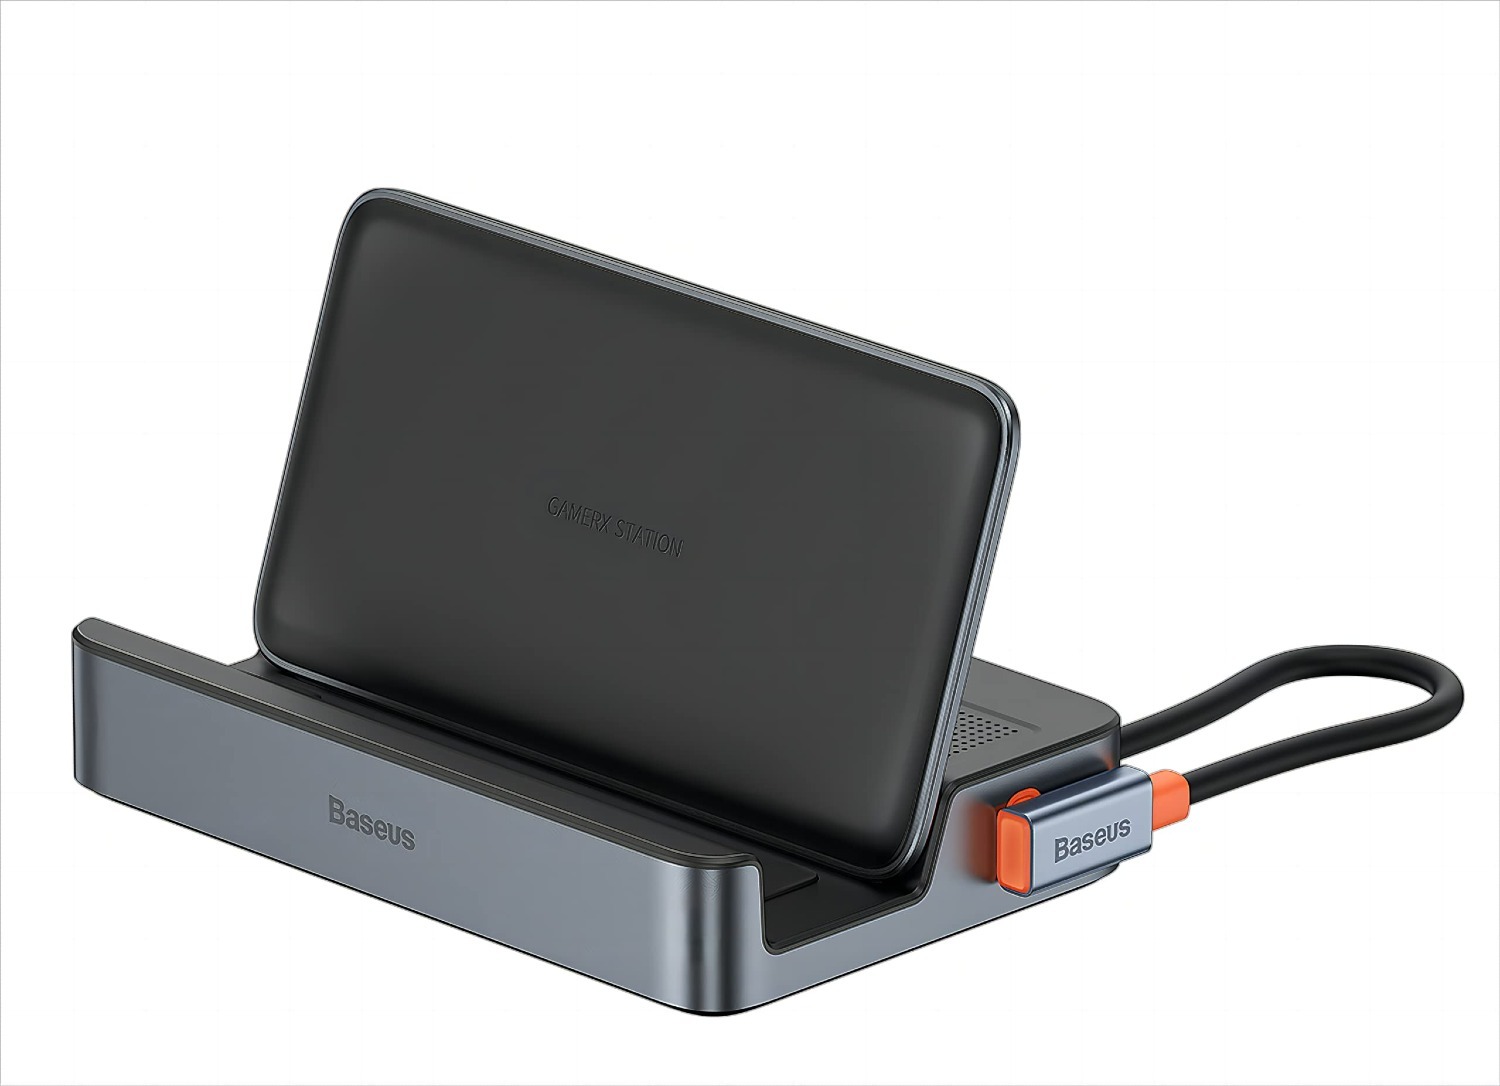 Baseus 6-in-1 Docking Station for Steam Deck $26 + Free Shipping